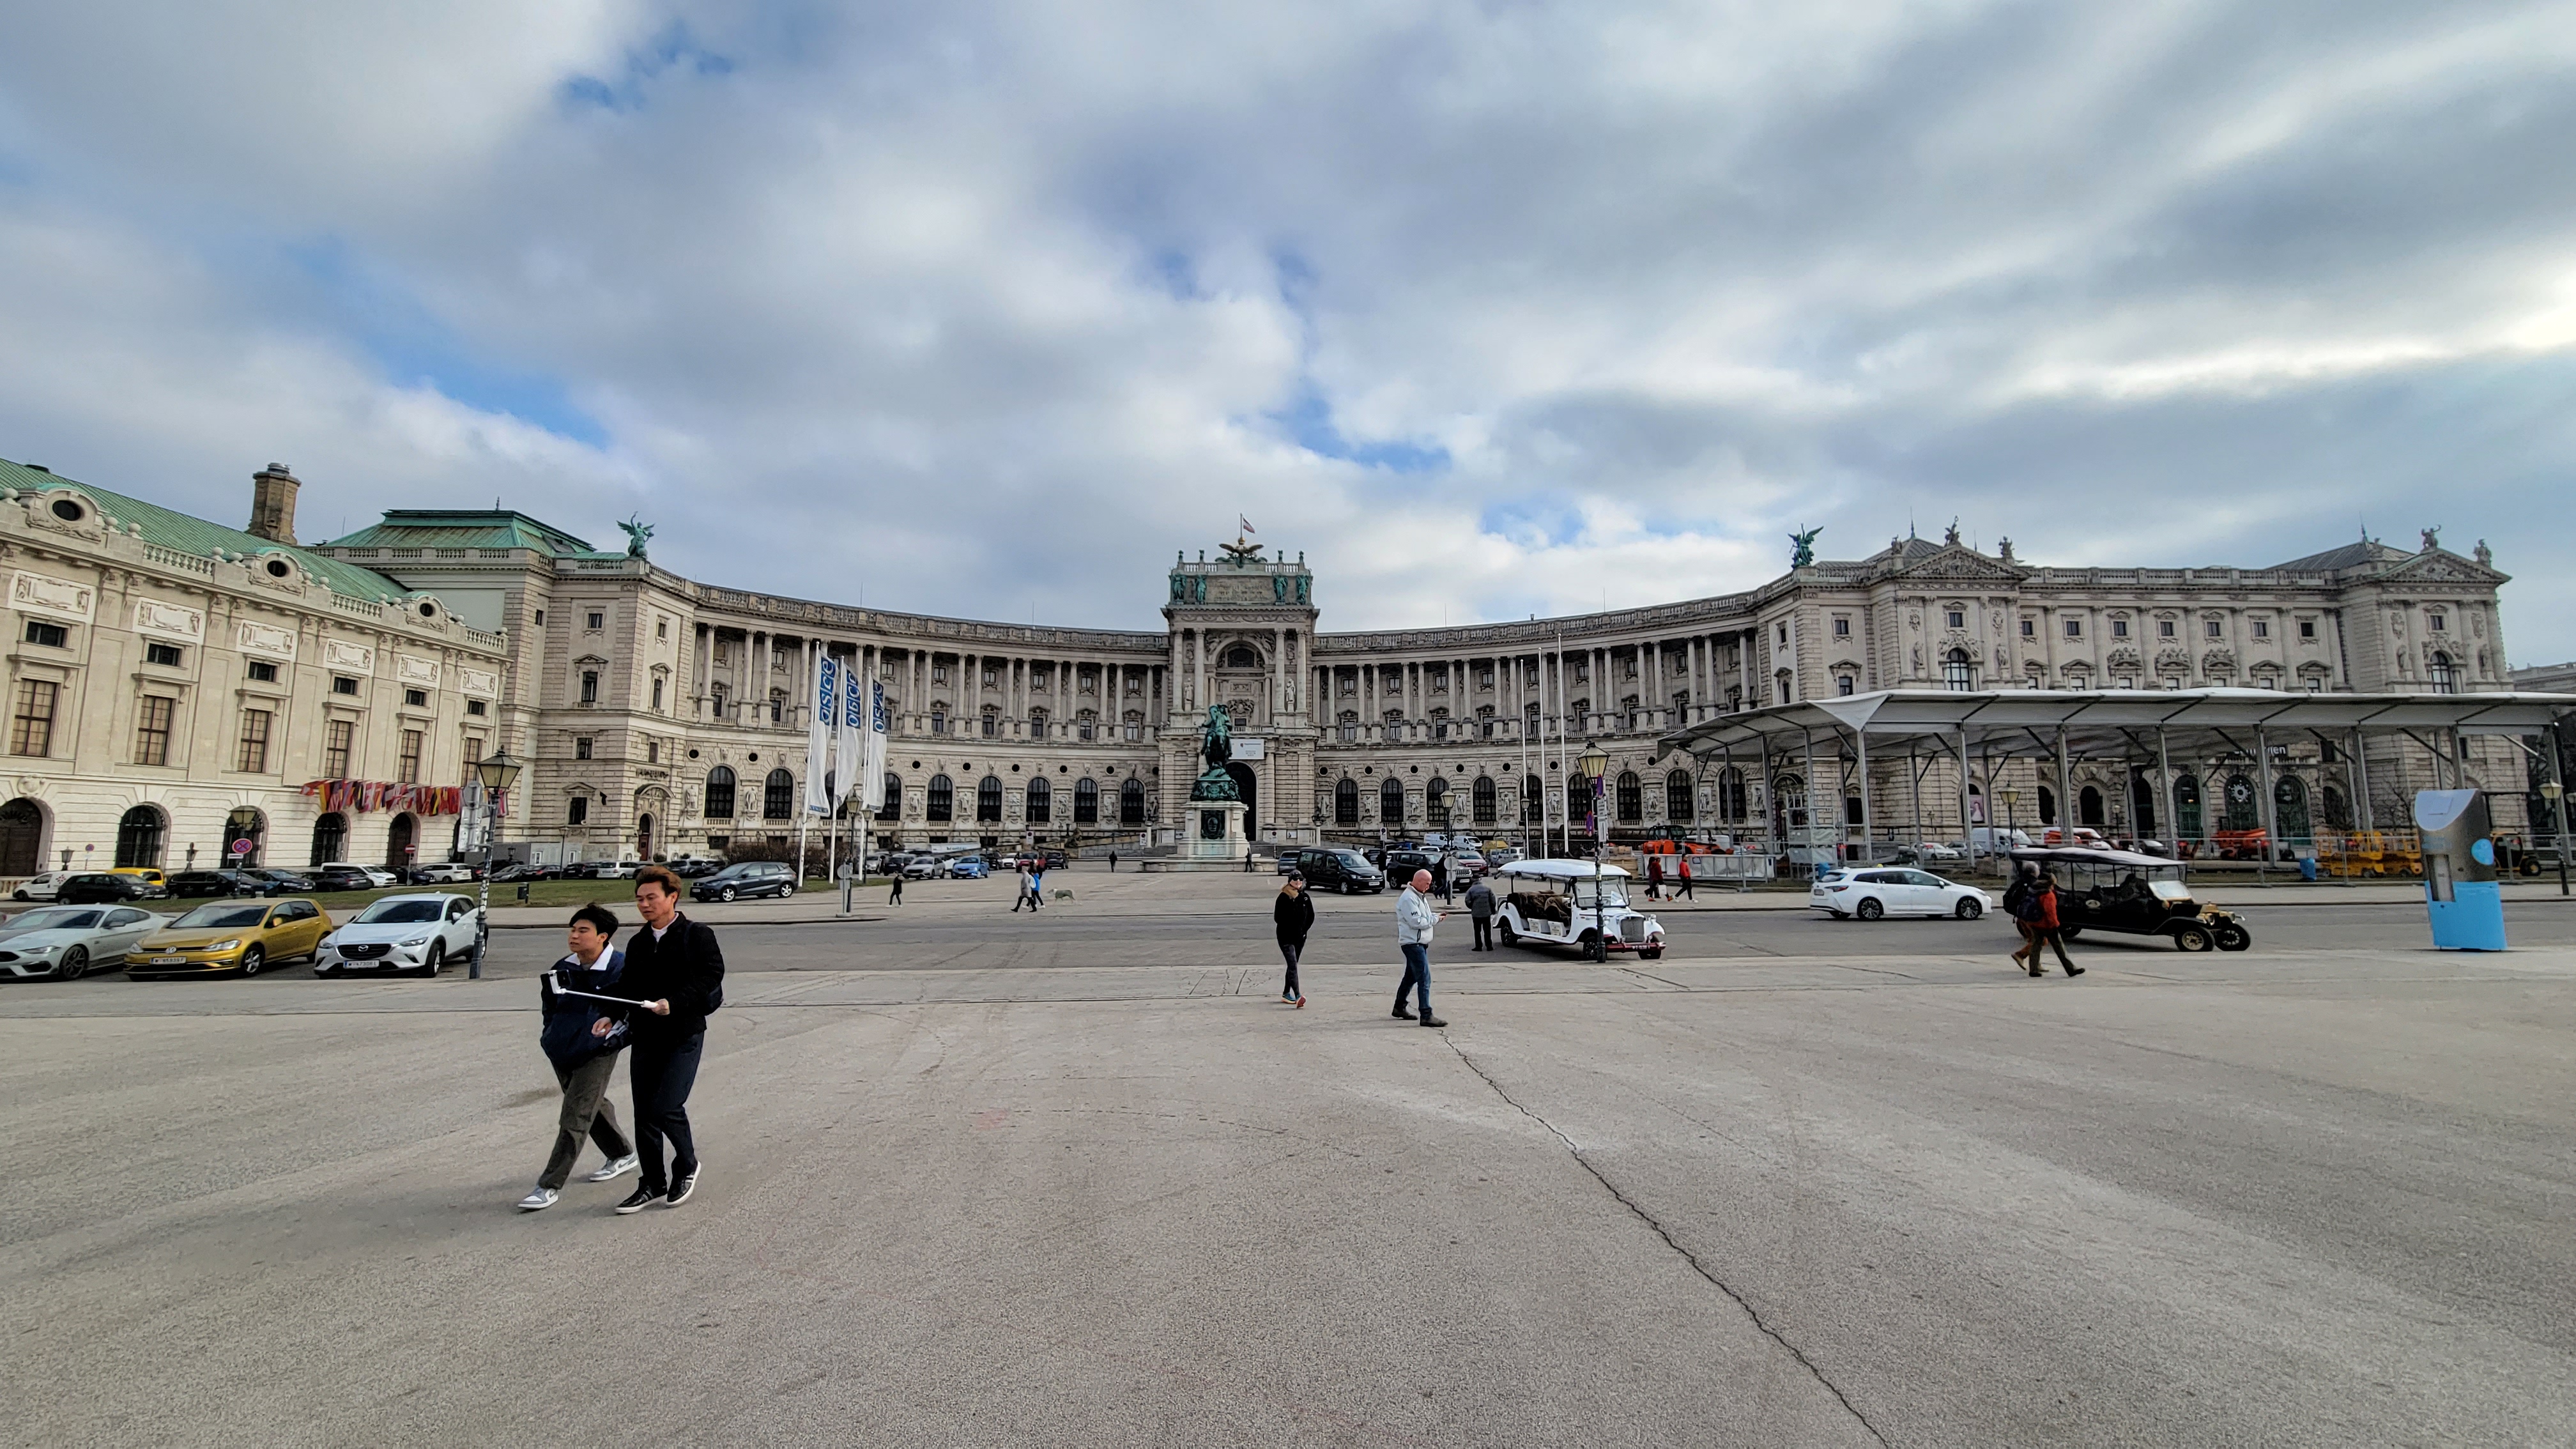 Hofburg Palace as seen from the Prince Eugene Equestrian Statue